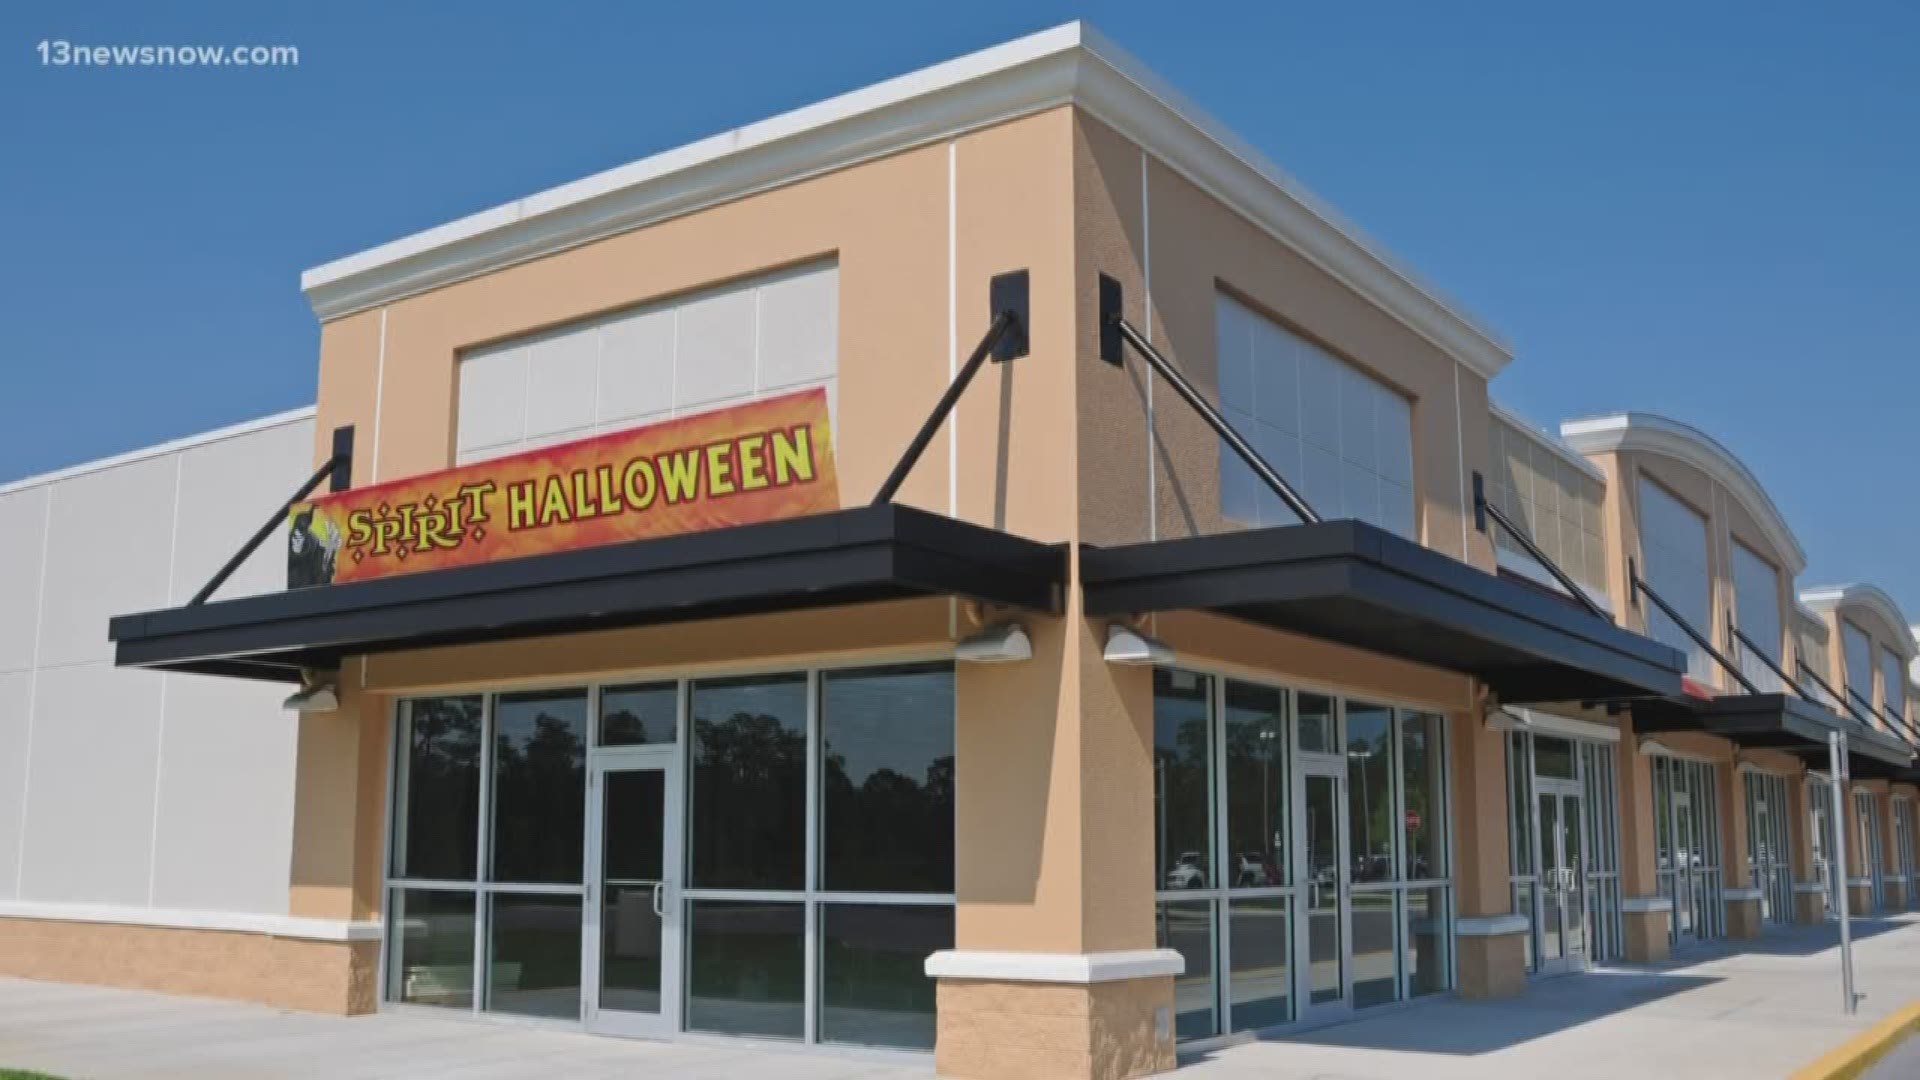 Spirit Halloween stores pop-up all over the country. As traditional retail shopping declines, there's more prime real-estate for pop-up stores like Spirit Halloween.